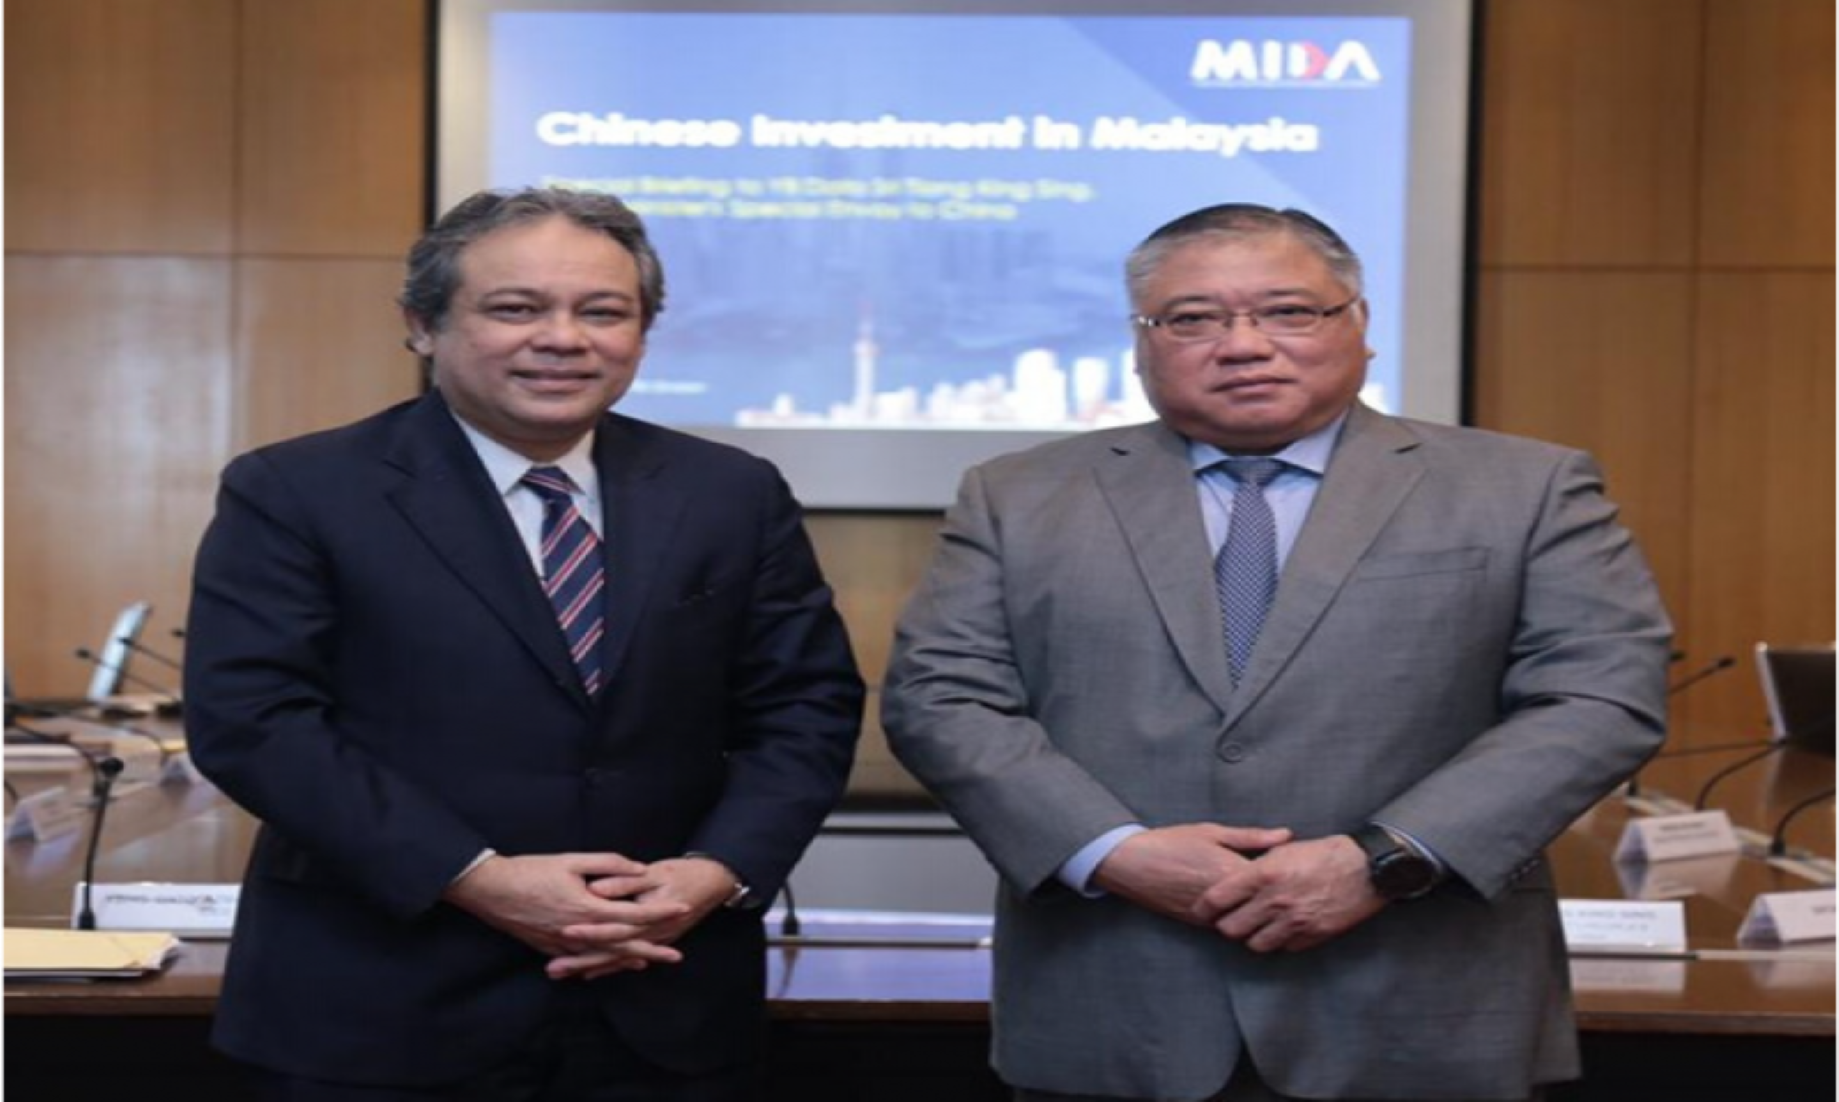 Malaysian Investment Authority Partnered With Chinese Firm’s Overseas Branch For Supply Chain Programme